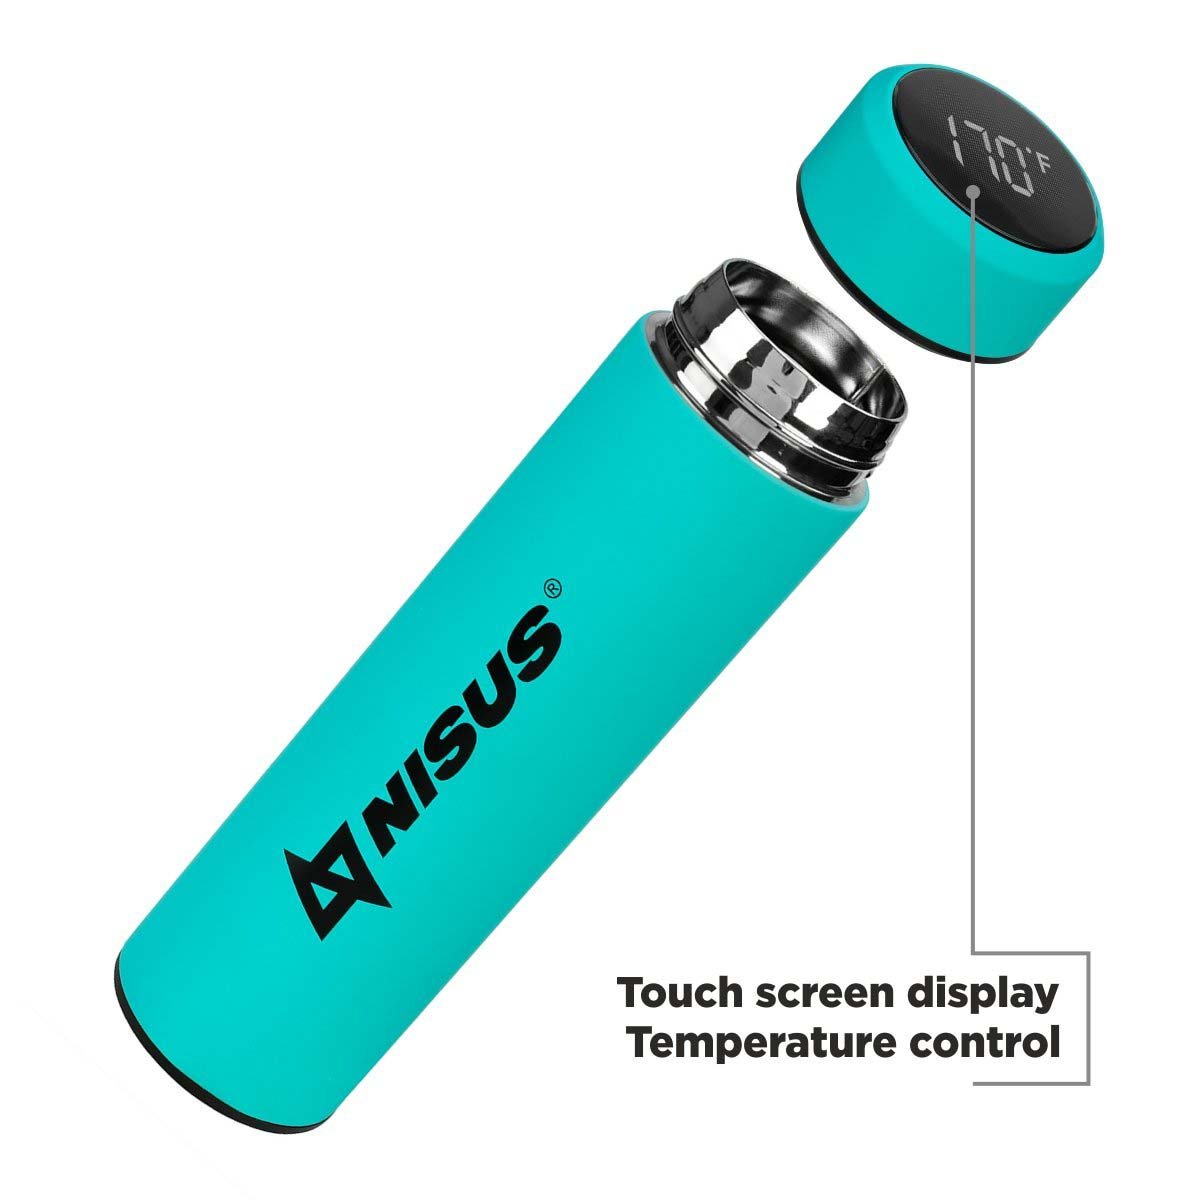 Stainless Insulated Water Bottle is equipped with a touch screen LED Temperature Display guaranteing temperature contro